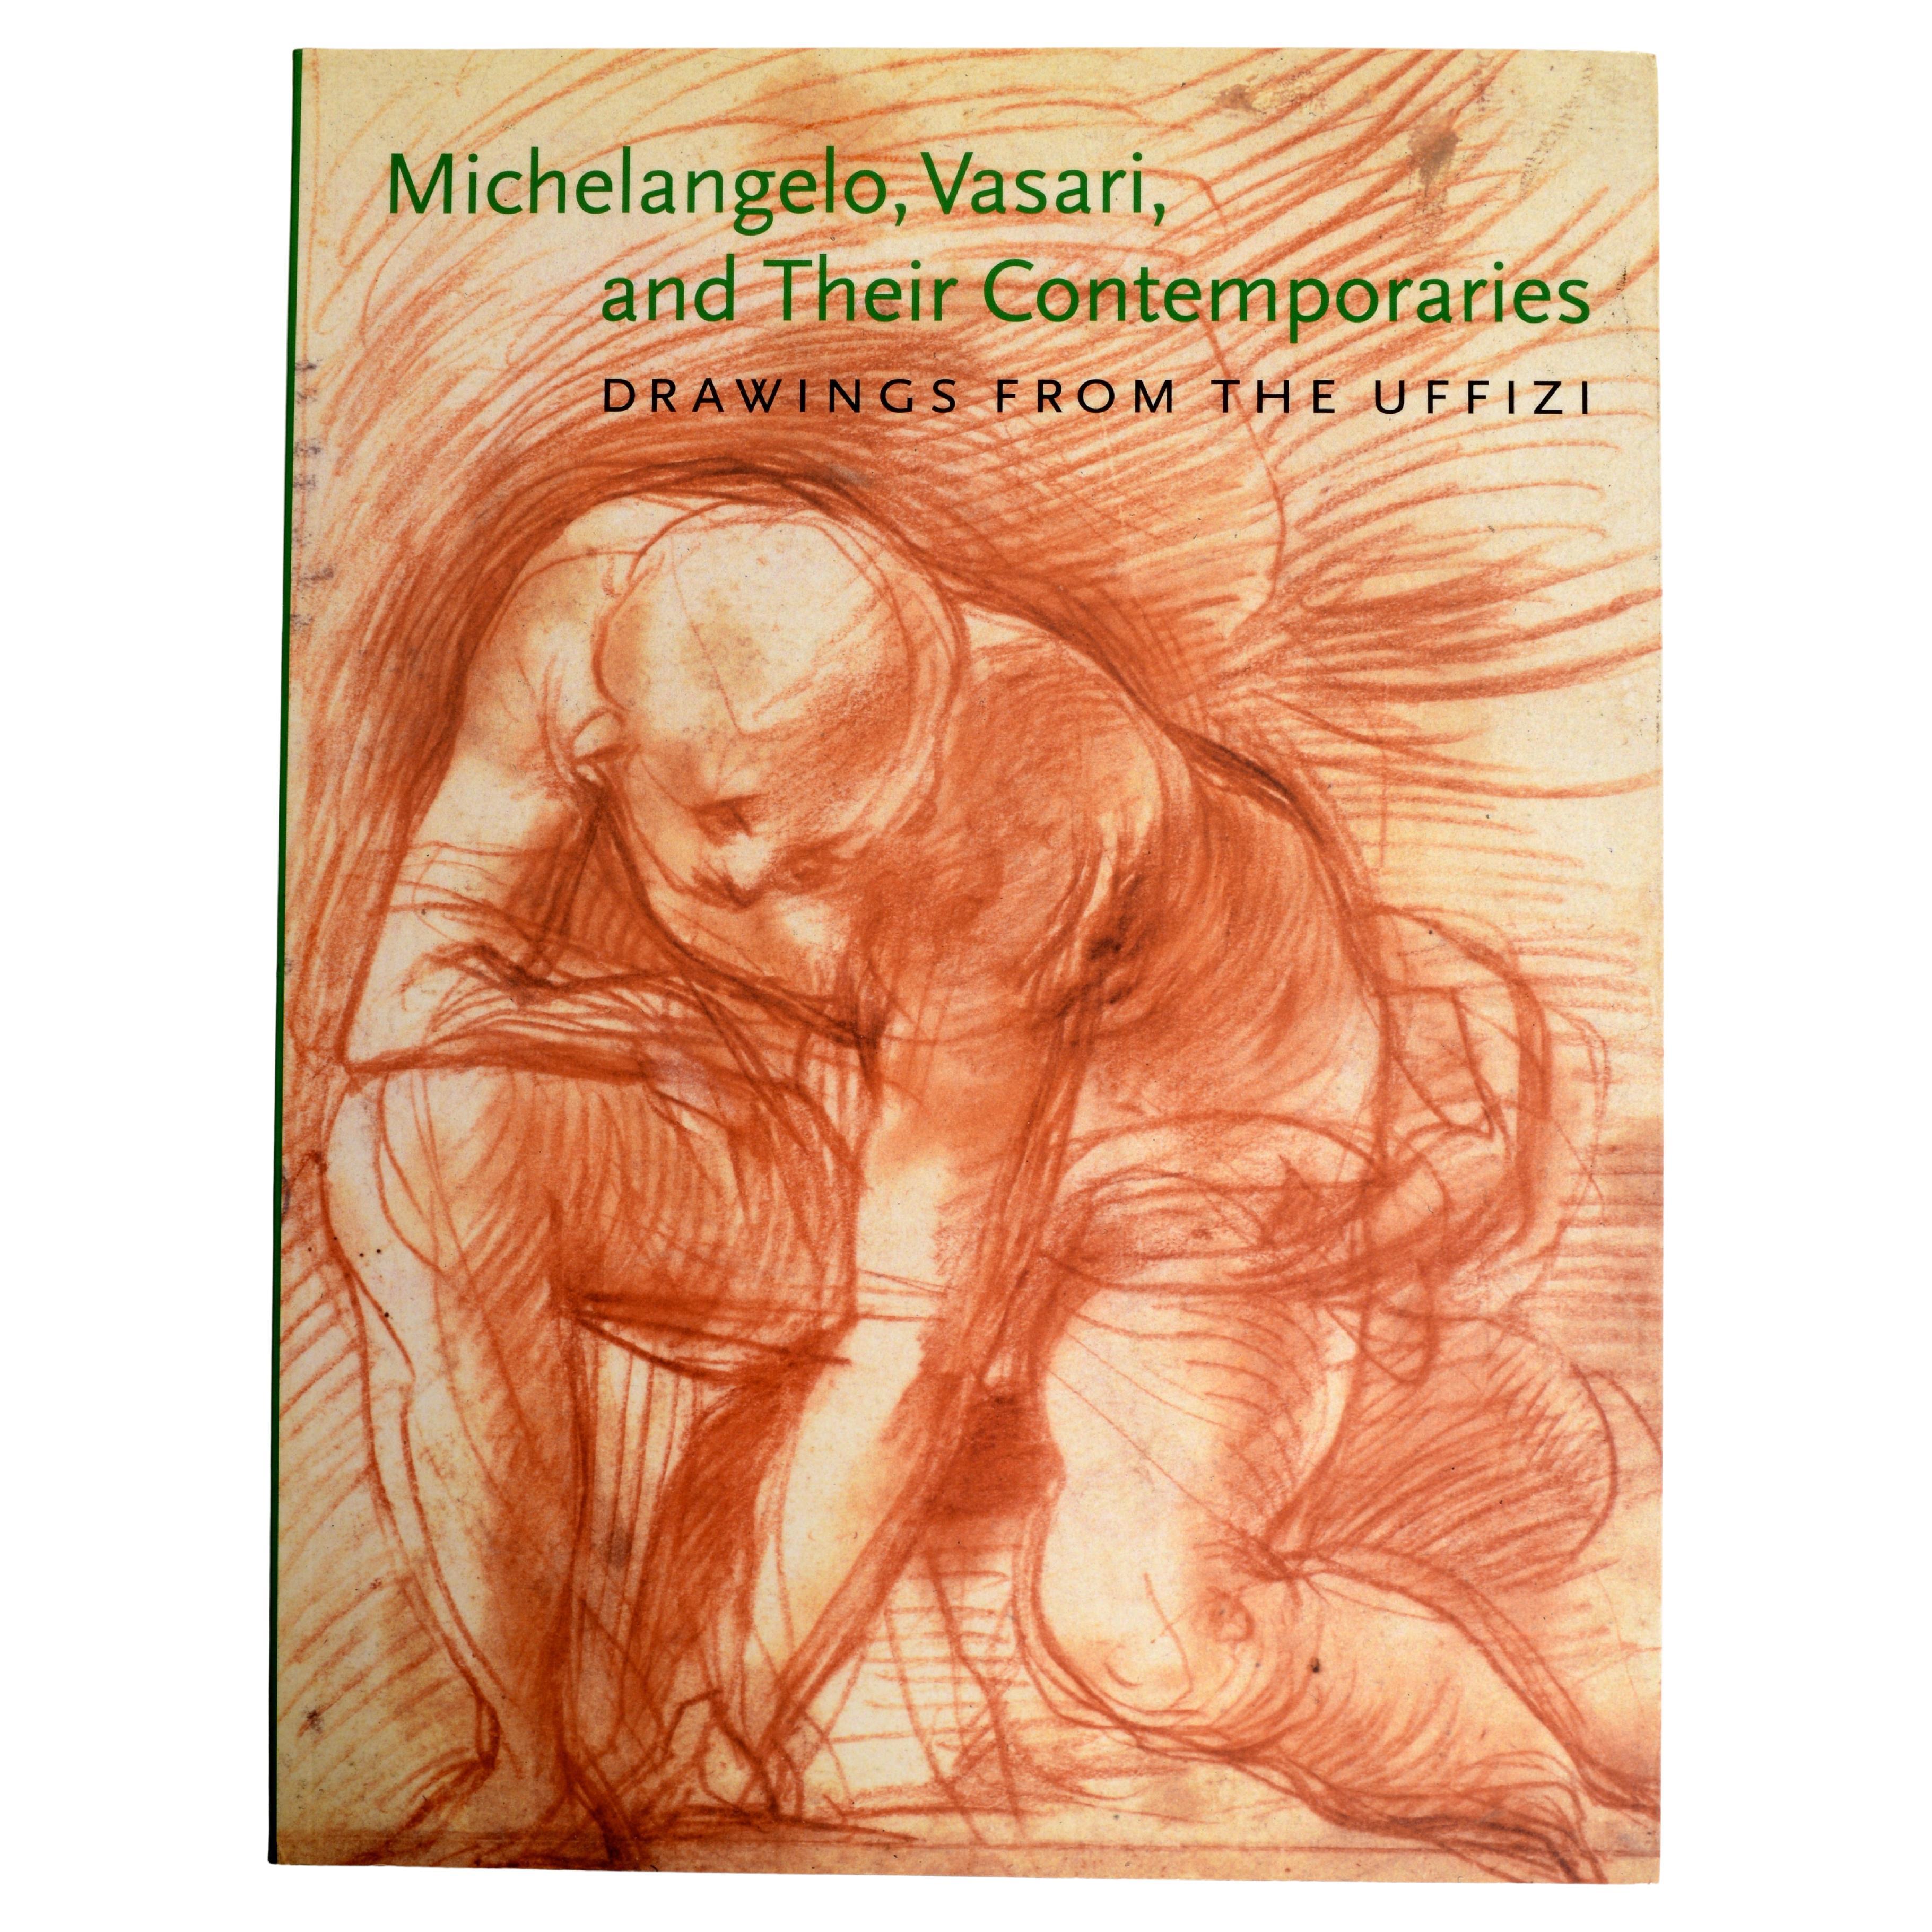 Michelangelo, Vasari, and Their Contemporaries: Drawings from the Uffizi, 1st Ed